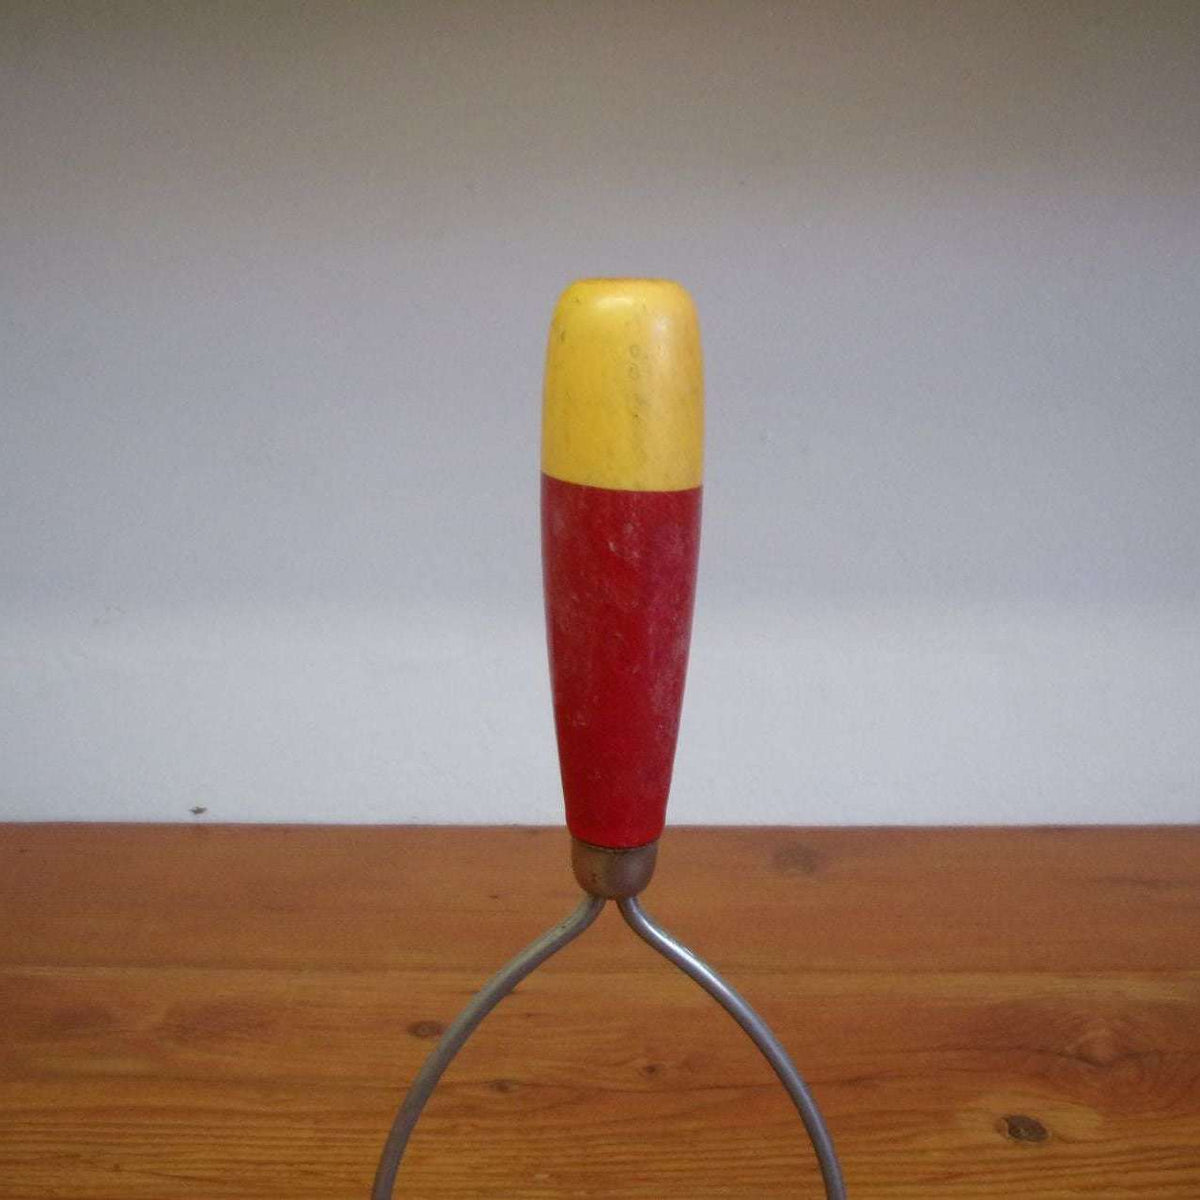 http://maandpasattic.com/cdn/shop/files/antique-vintage-potato-masher-with-red-with-white-handle-kitchen-tools-gadgets-ma-and-pas-attic-32293014_1200x1200.jpg?v=1683068943